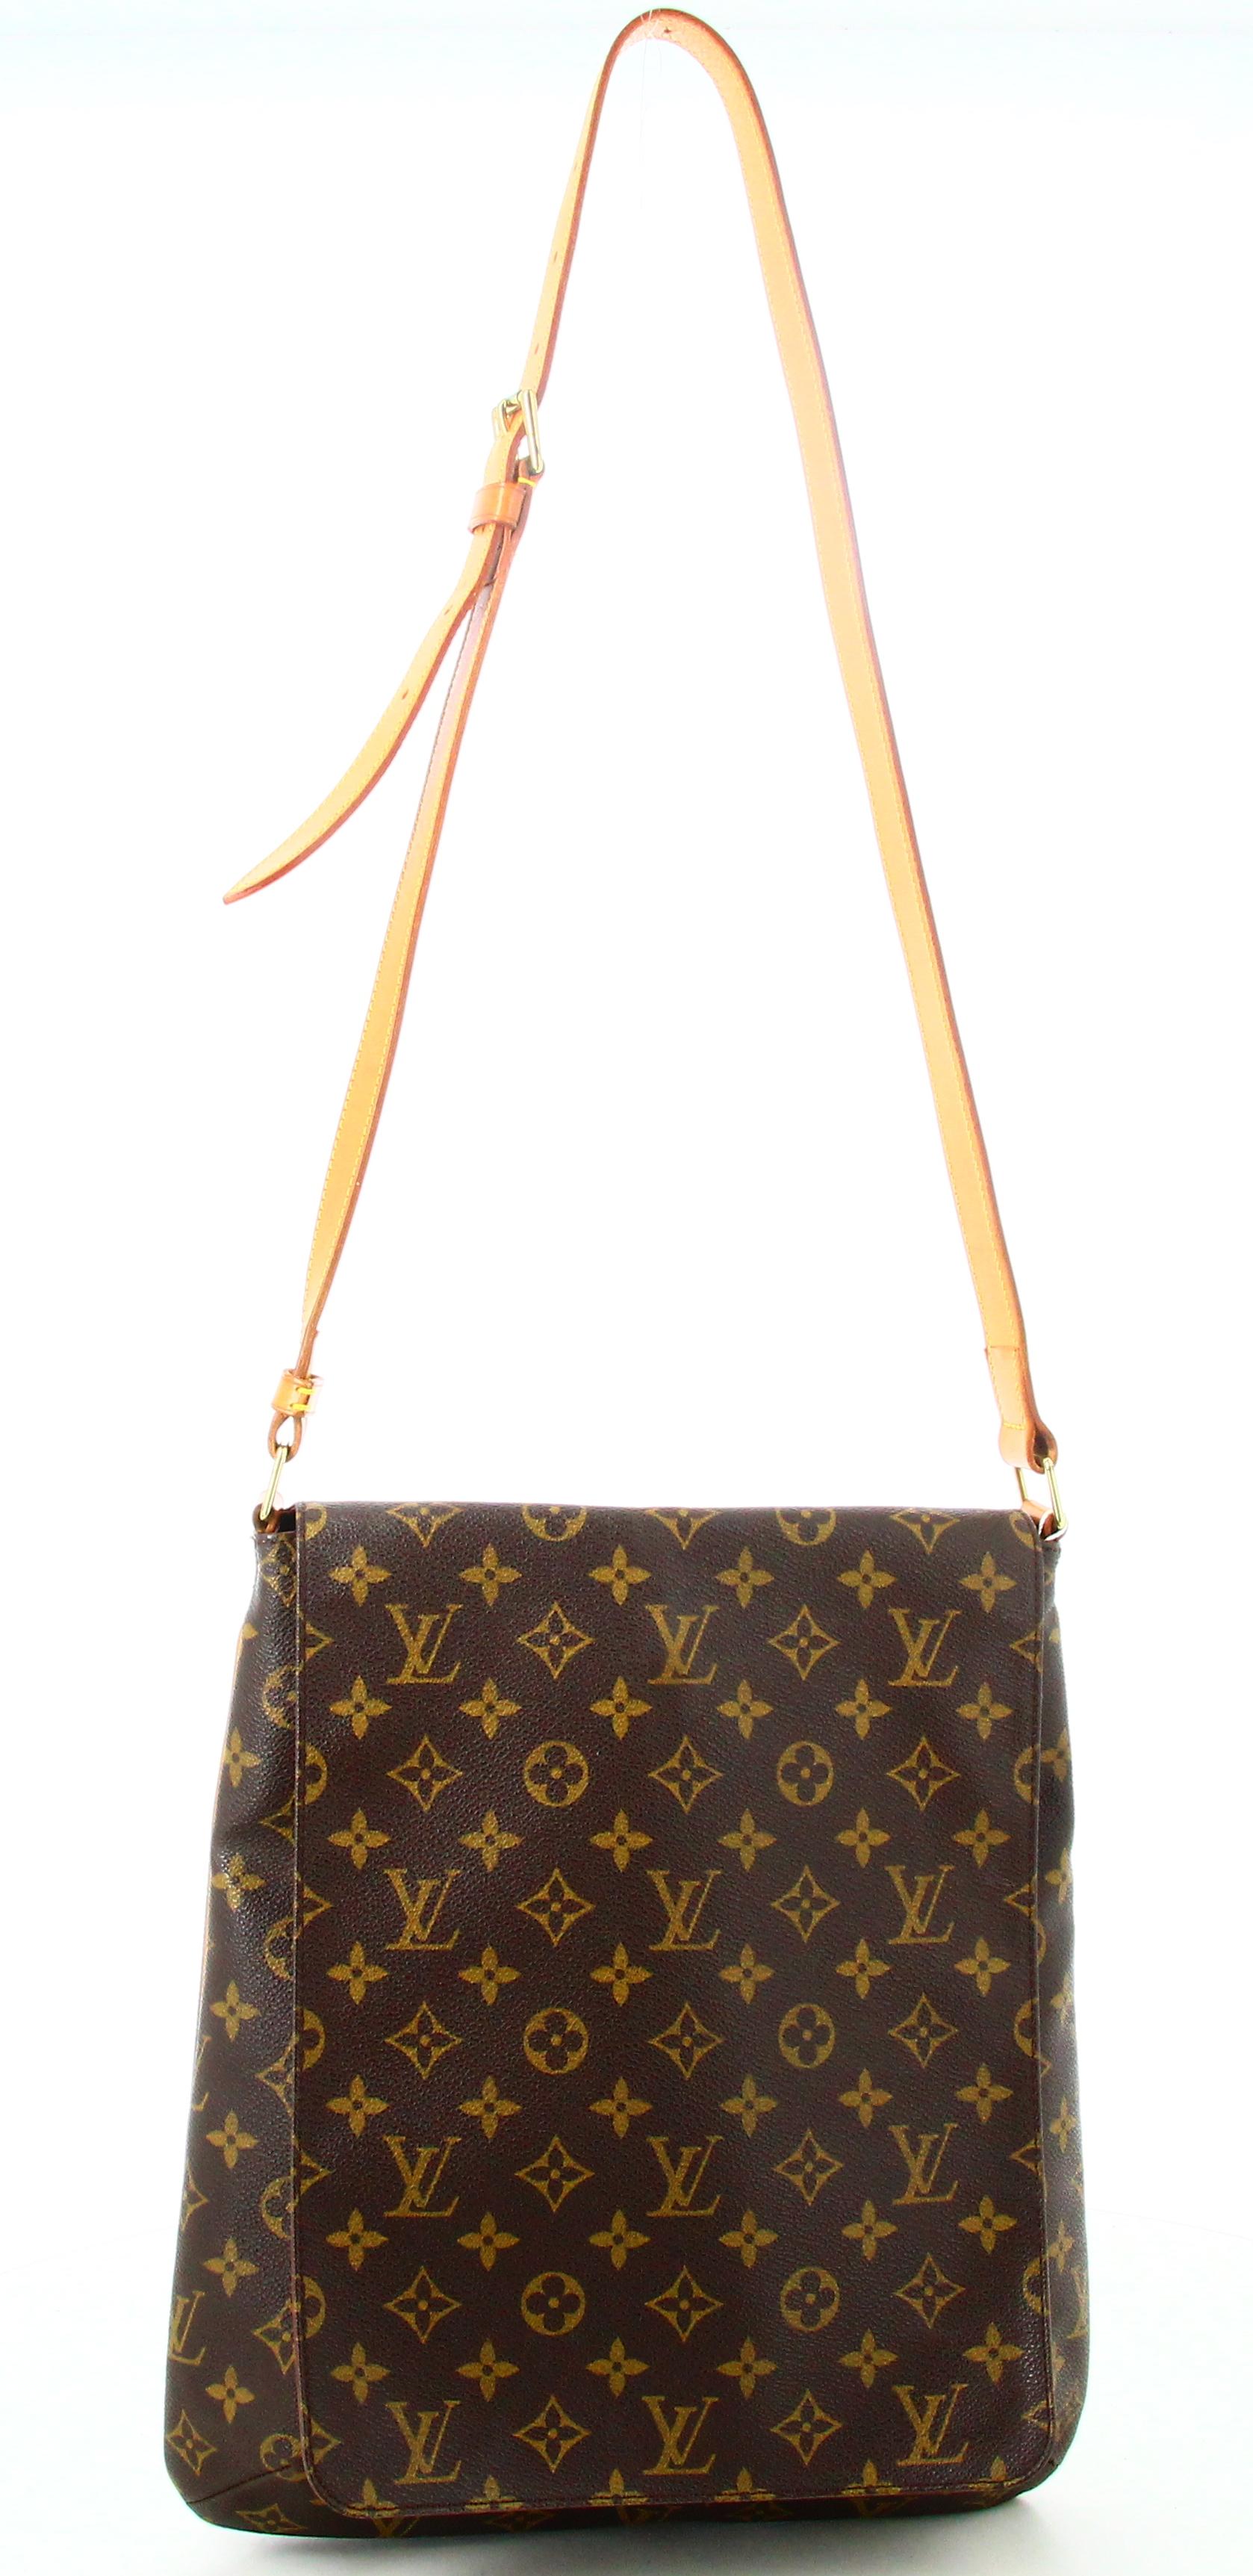 1998 Louis Vuitton Monogram Musette Shoulder Bag Salsa GM

- Very good condition. Shows only very slight traces of wear over time. 
- Louis vuitton Musette Bag 
- Monogram canvas 
- Brown leather shoulder strap 
- Inside : pocket 